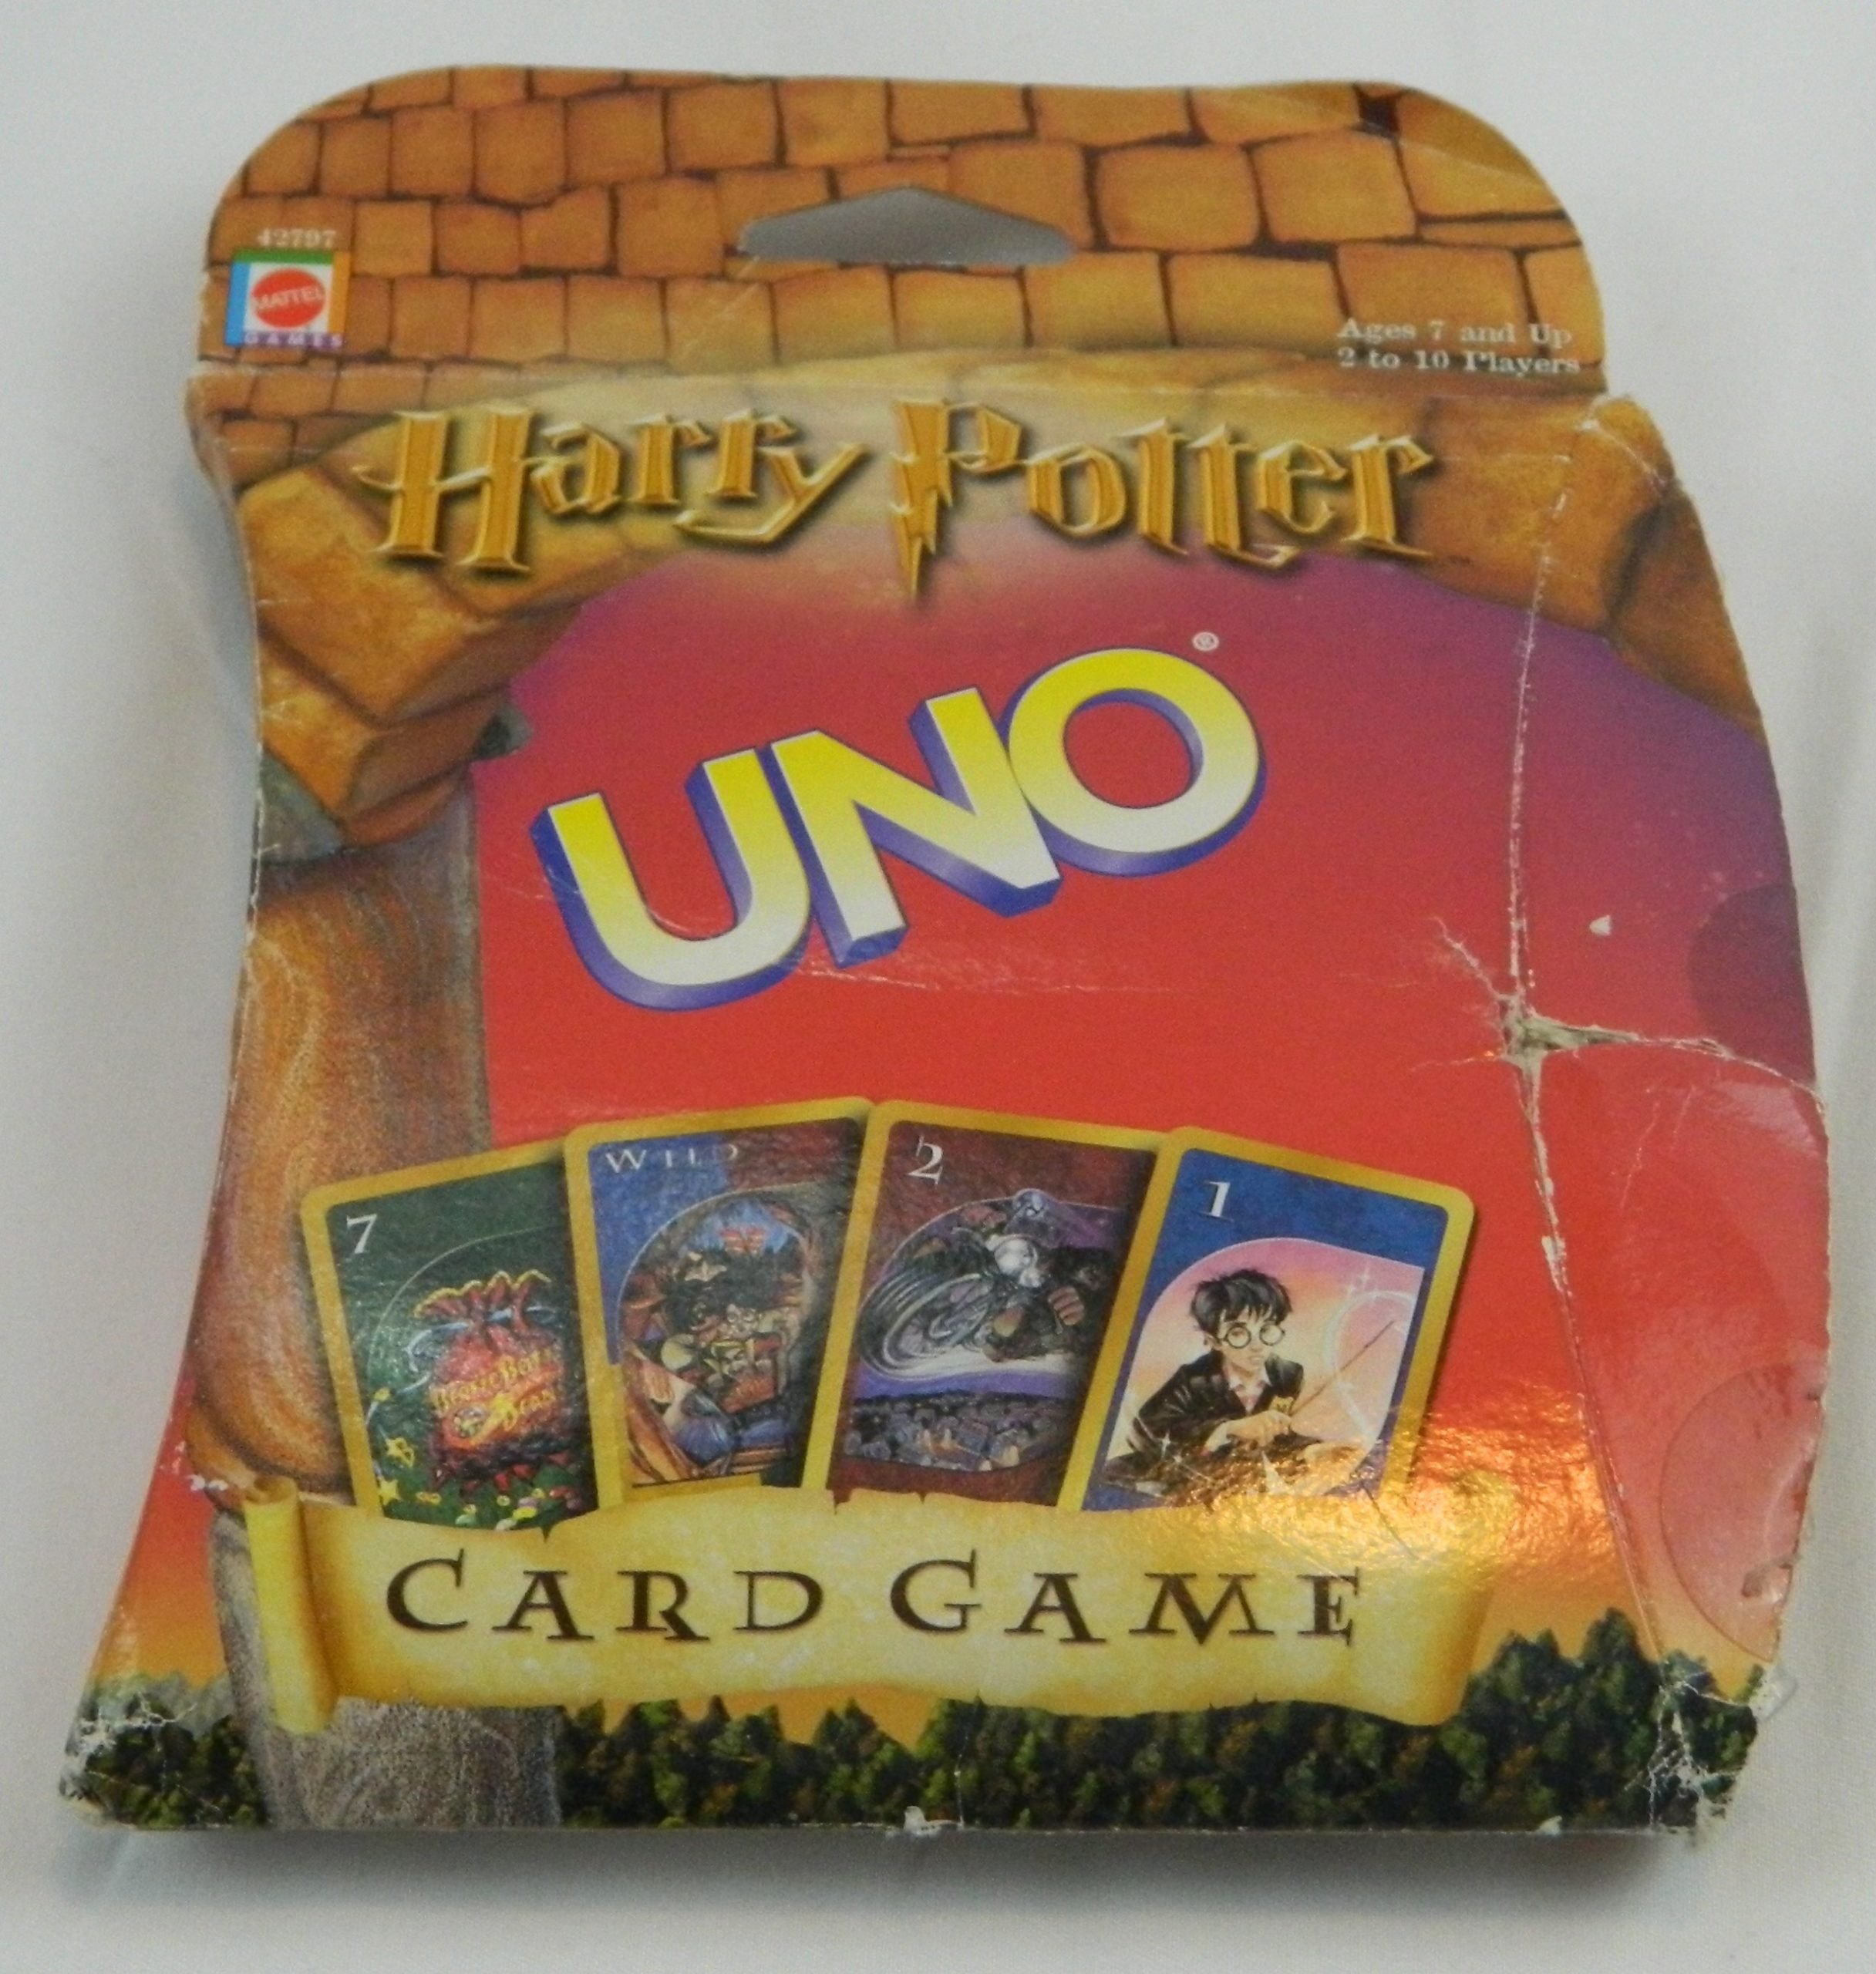 Harry Potter UNO Card Game Review and Rules